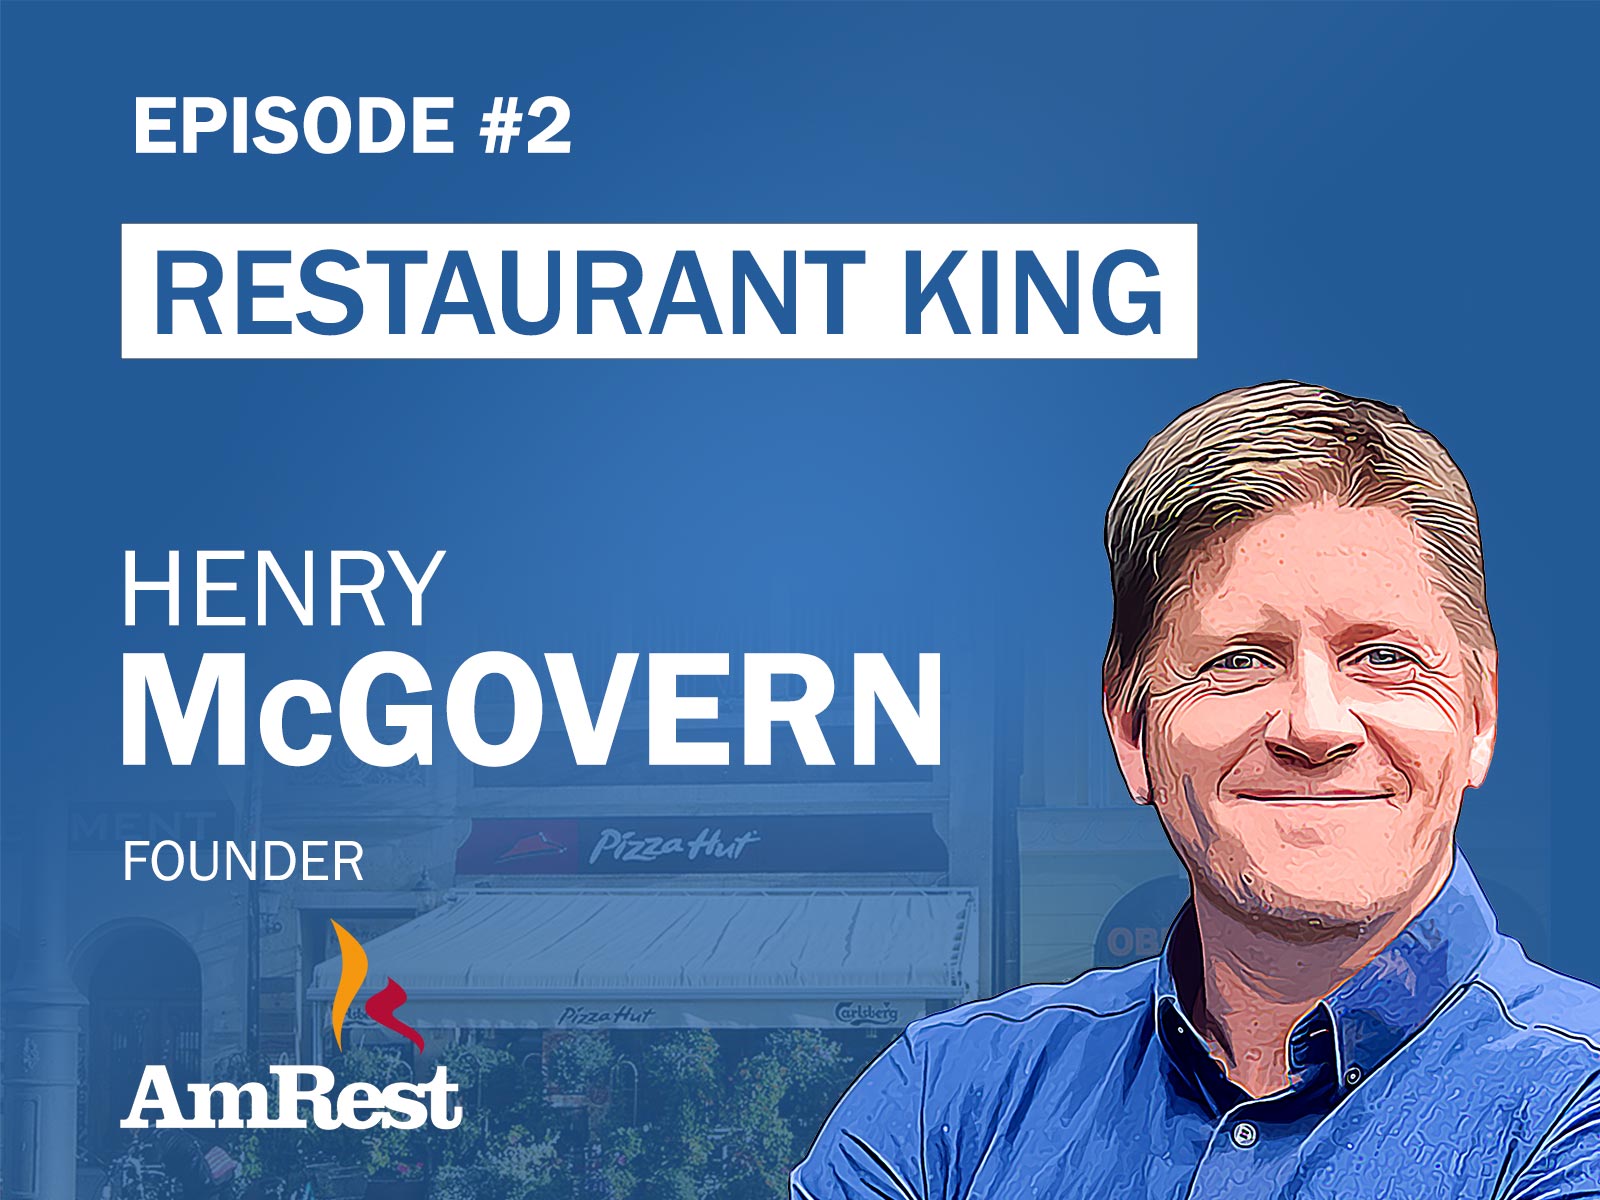 Henry McGovern, founder of AmRest, the largest restaurant chain in Europe and now co-owner of Vapiano. After the Berlin Wall fell, Henry left college to seek opportunities in a changing Europe — moving across the world to Wroclaw, Poland where he secured the rights for a Pizza Hut in 1993 and 26 years later owned more than 2,300 restaurants. He is considered among the most successful entrepreneurs in the restaurant industry and we think his story is one of the most remarkable we have discovered.